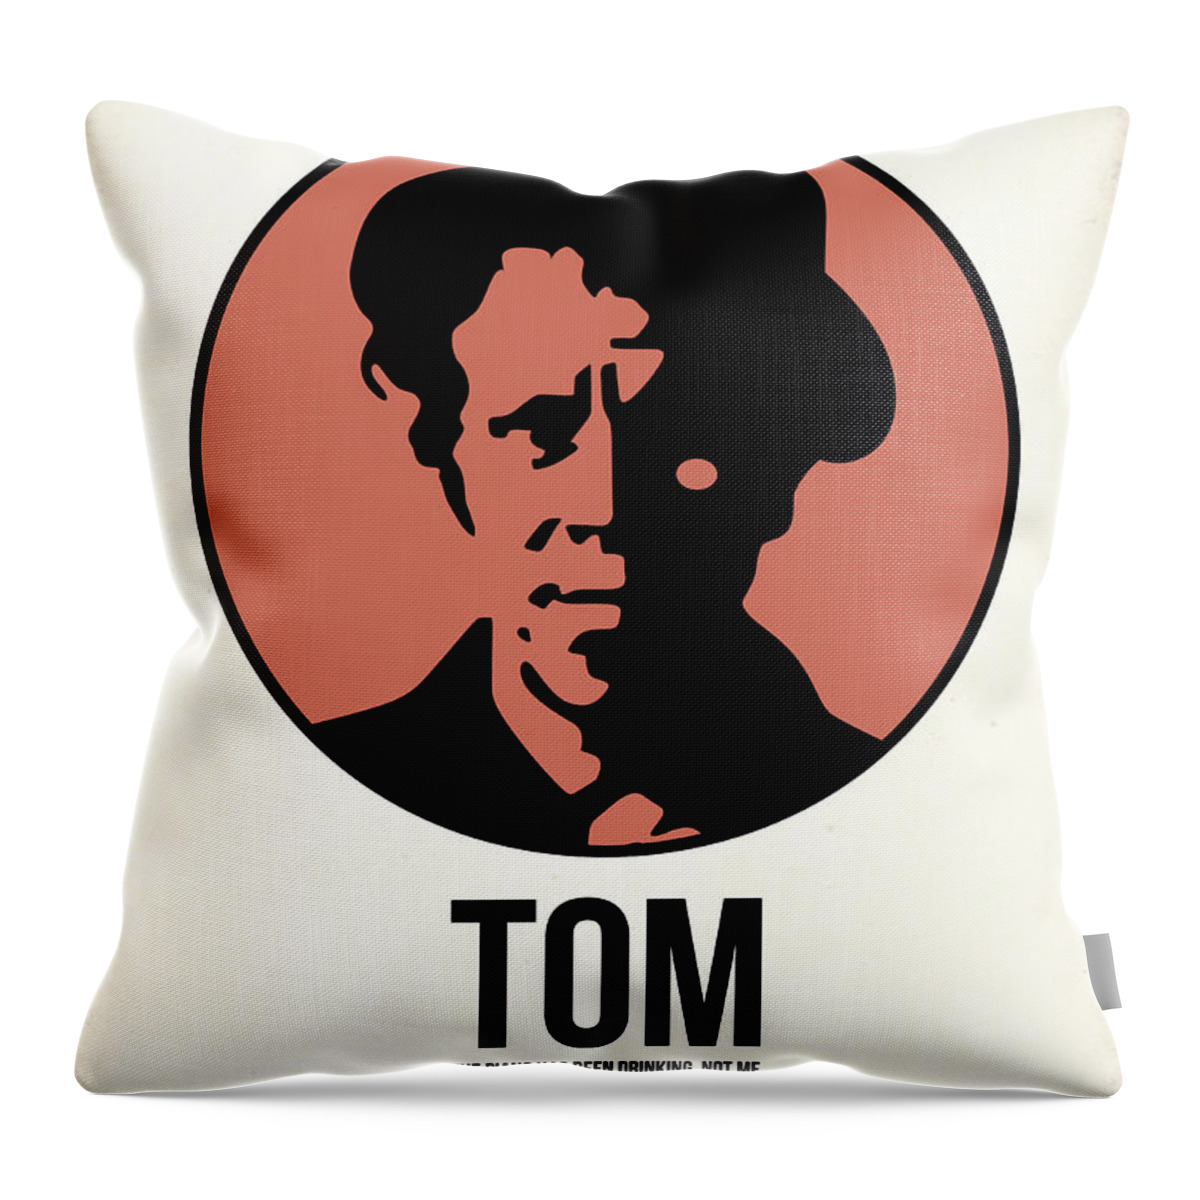 Music Throw Pillow featuring the digital art Tom Poster 1 by Naxart Studio